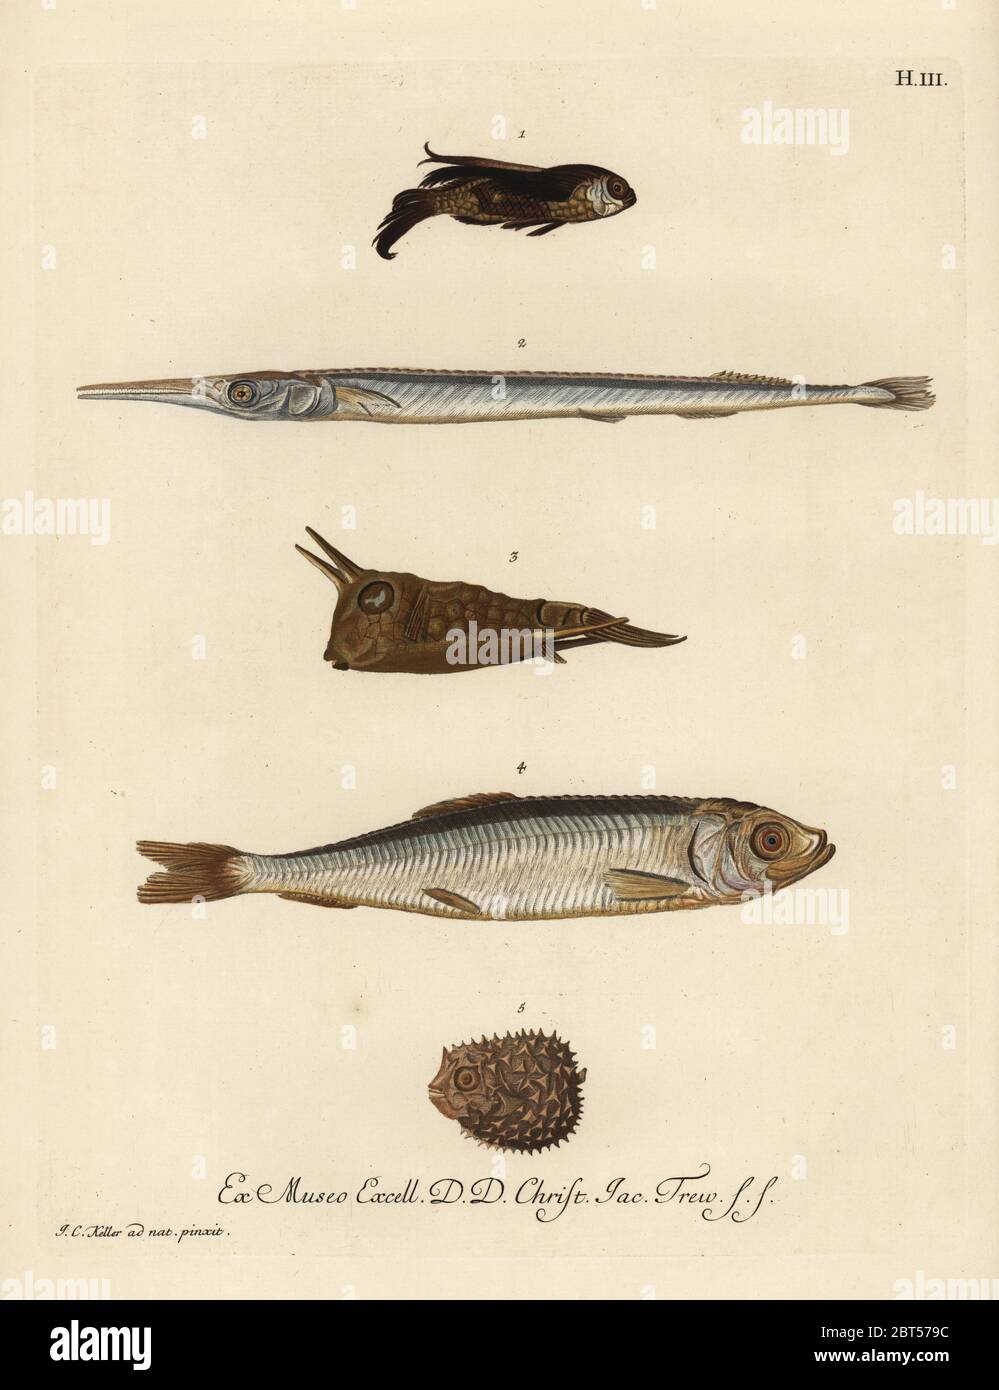 Gurnard, Chelidonichthys species 1, needlefish, Belone belone 2, longhorn cowfish, Lactoria cornuta 3, herring, Clupea harengus 4, and few-spined porcupinefish, Chilomycterus reticulatus 5. Handcoloured copperplate engraving after an illustration by Johann Christoph Keller from Georg Wolfgang Knorr's Deliciae Naturae Selectae of Kabinet van Zeldzaamheden der Natuur, Blusse and Son, Nuremberg, 1771. Specimens from a Wunderkammer or Cabinet of Curiosities owned by Dr. Christoph Jacob Trew in Nuremberg. Stock Photo